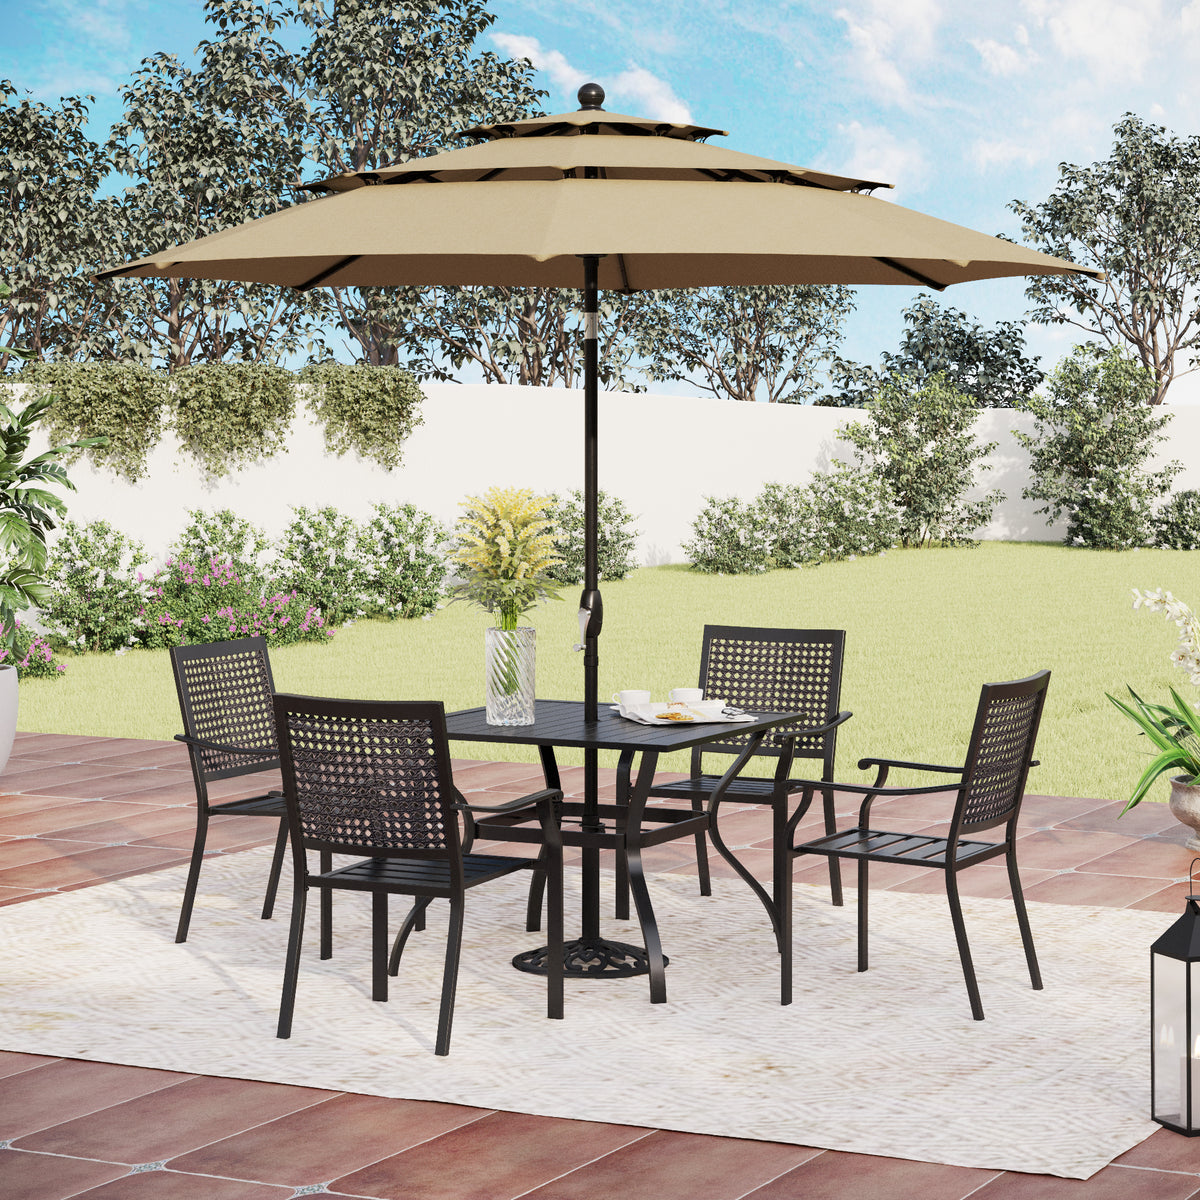 MFSTUDIO 6-Piece Outdoor Dining Set with Umbrella Steel Square Table & Bull's Eye Pattern Dining Chairs